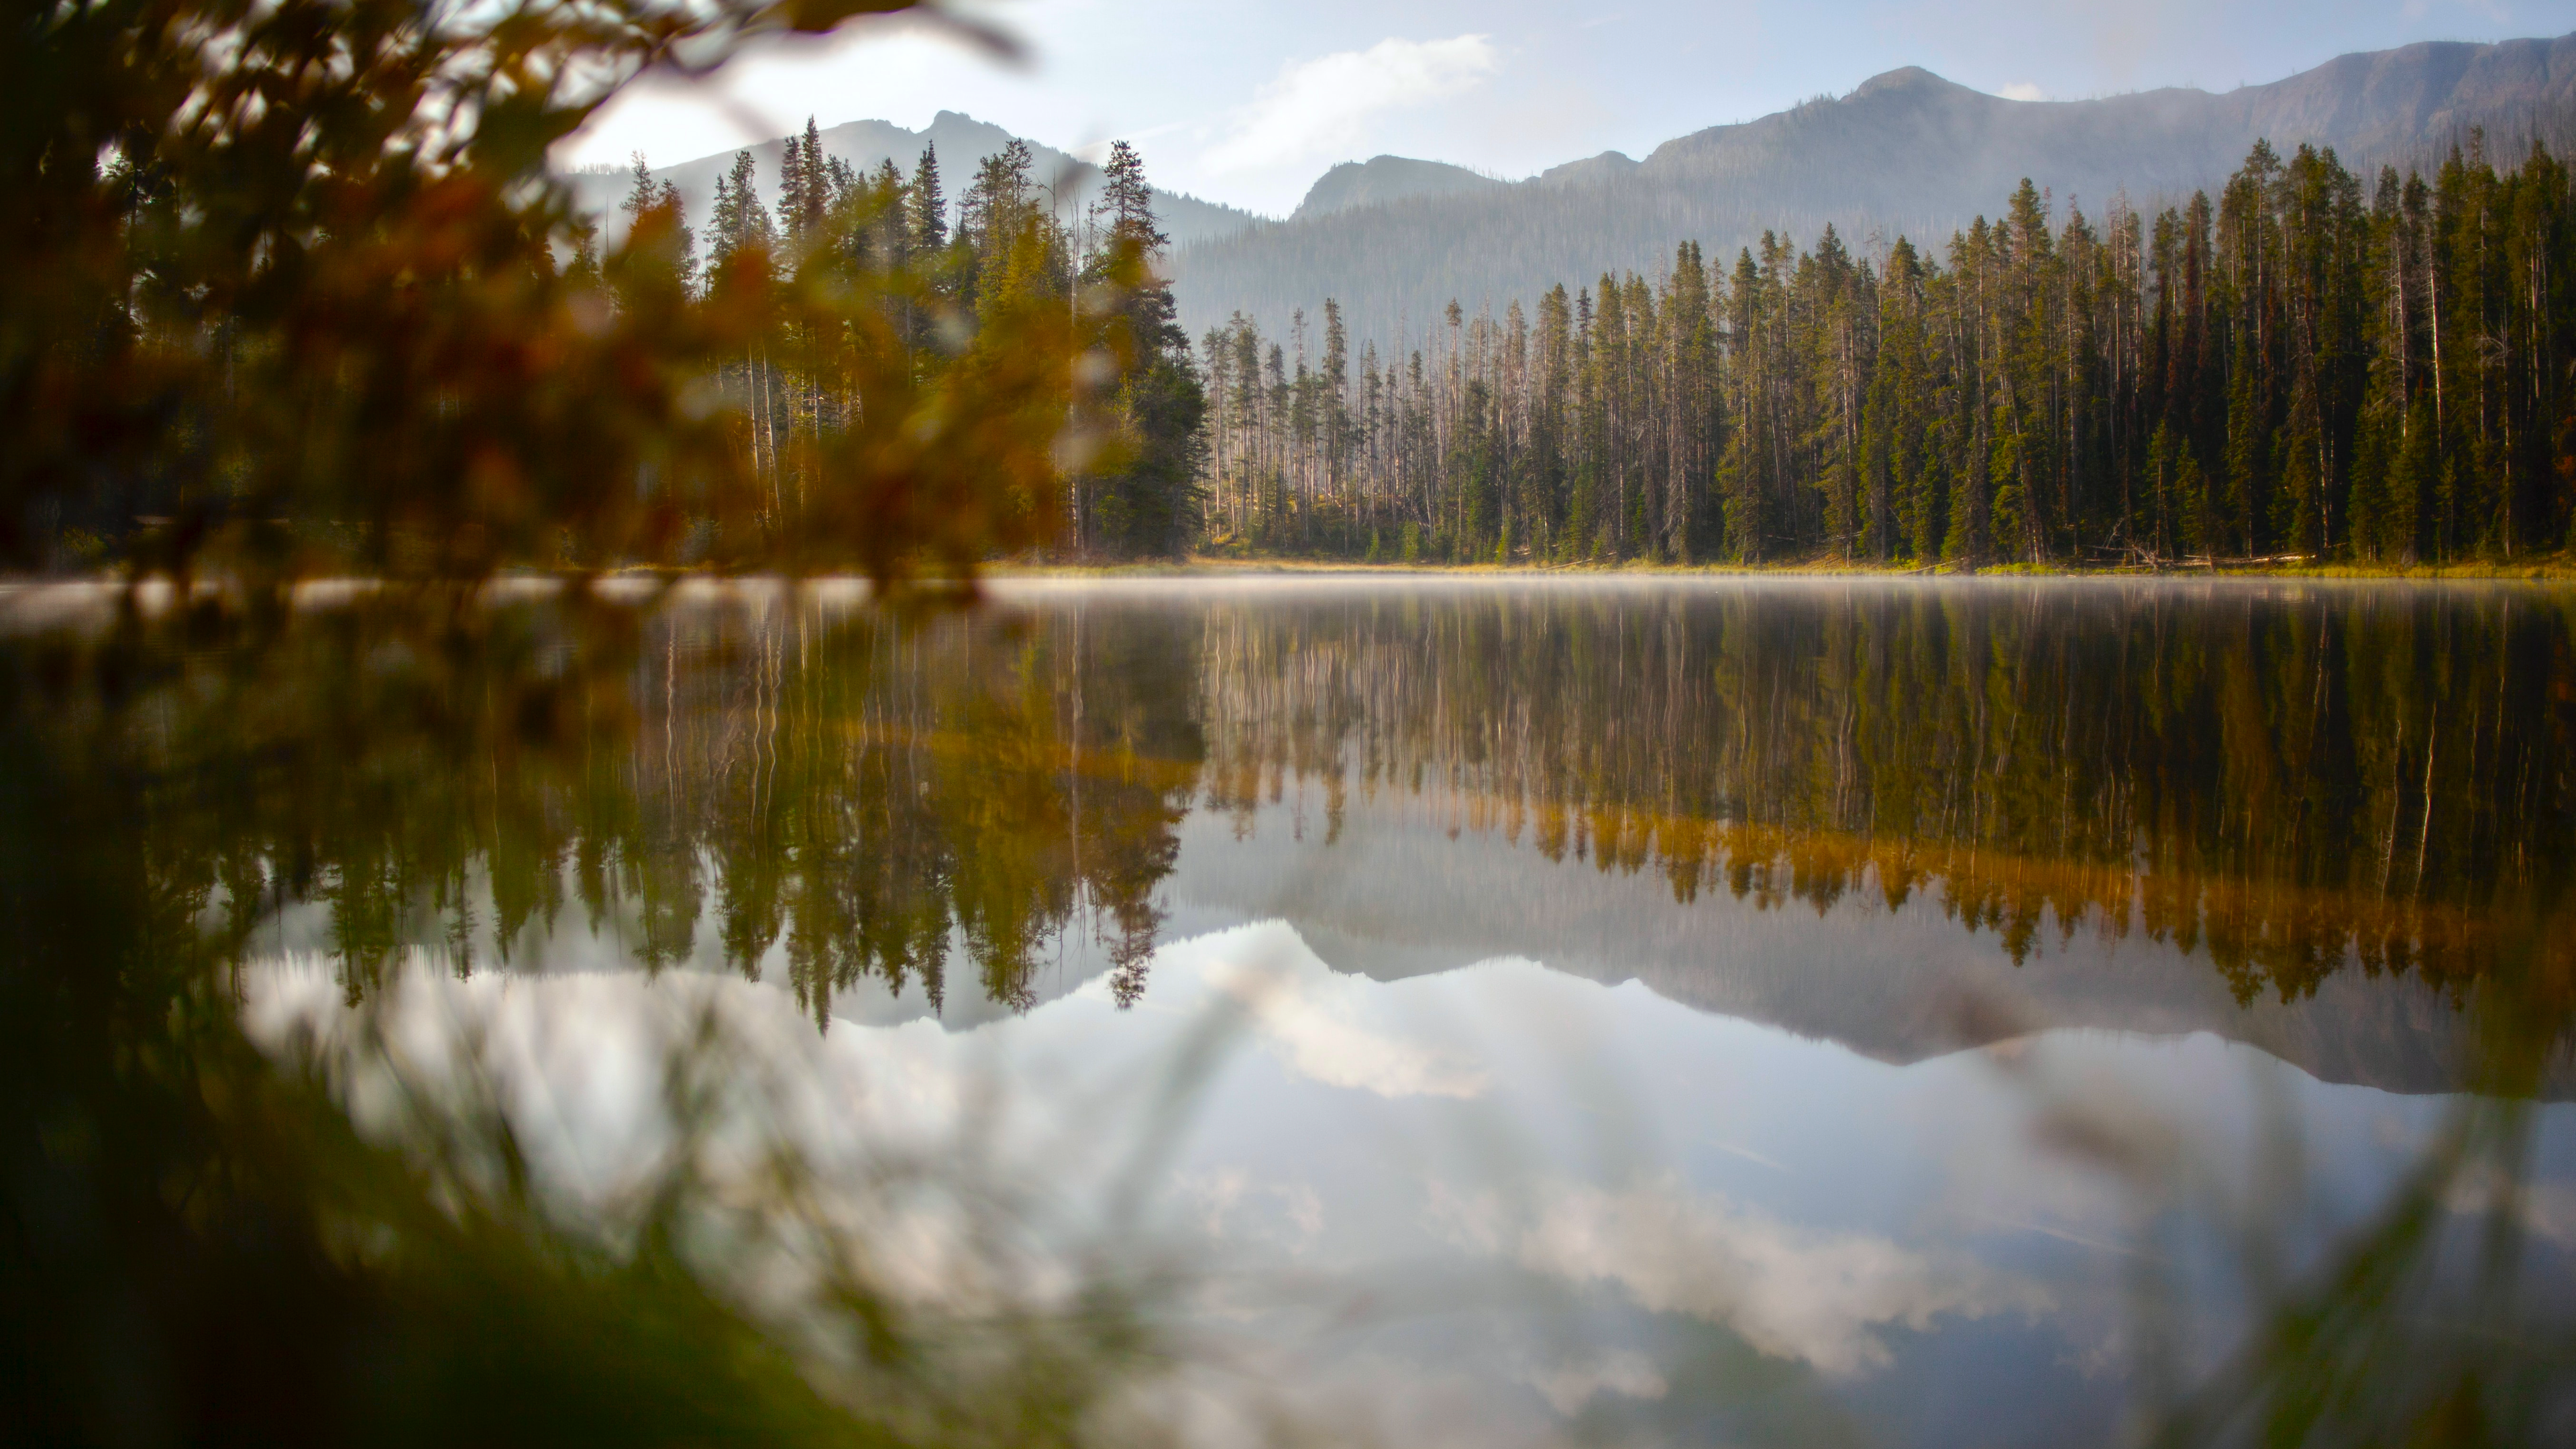 General 3840x2160 nature landscape fir forest reflection water lake wilderness Yellowstone National Park Wyoming USA